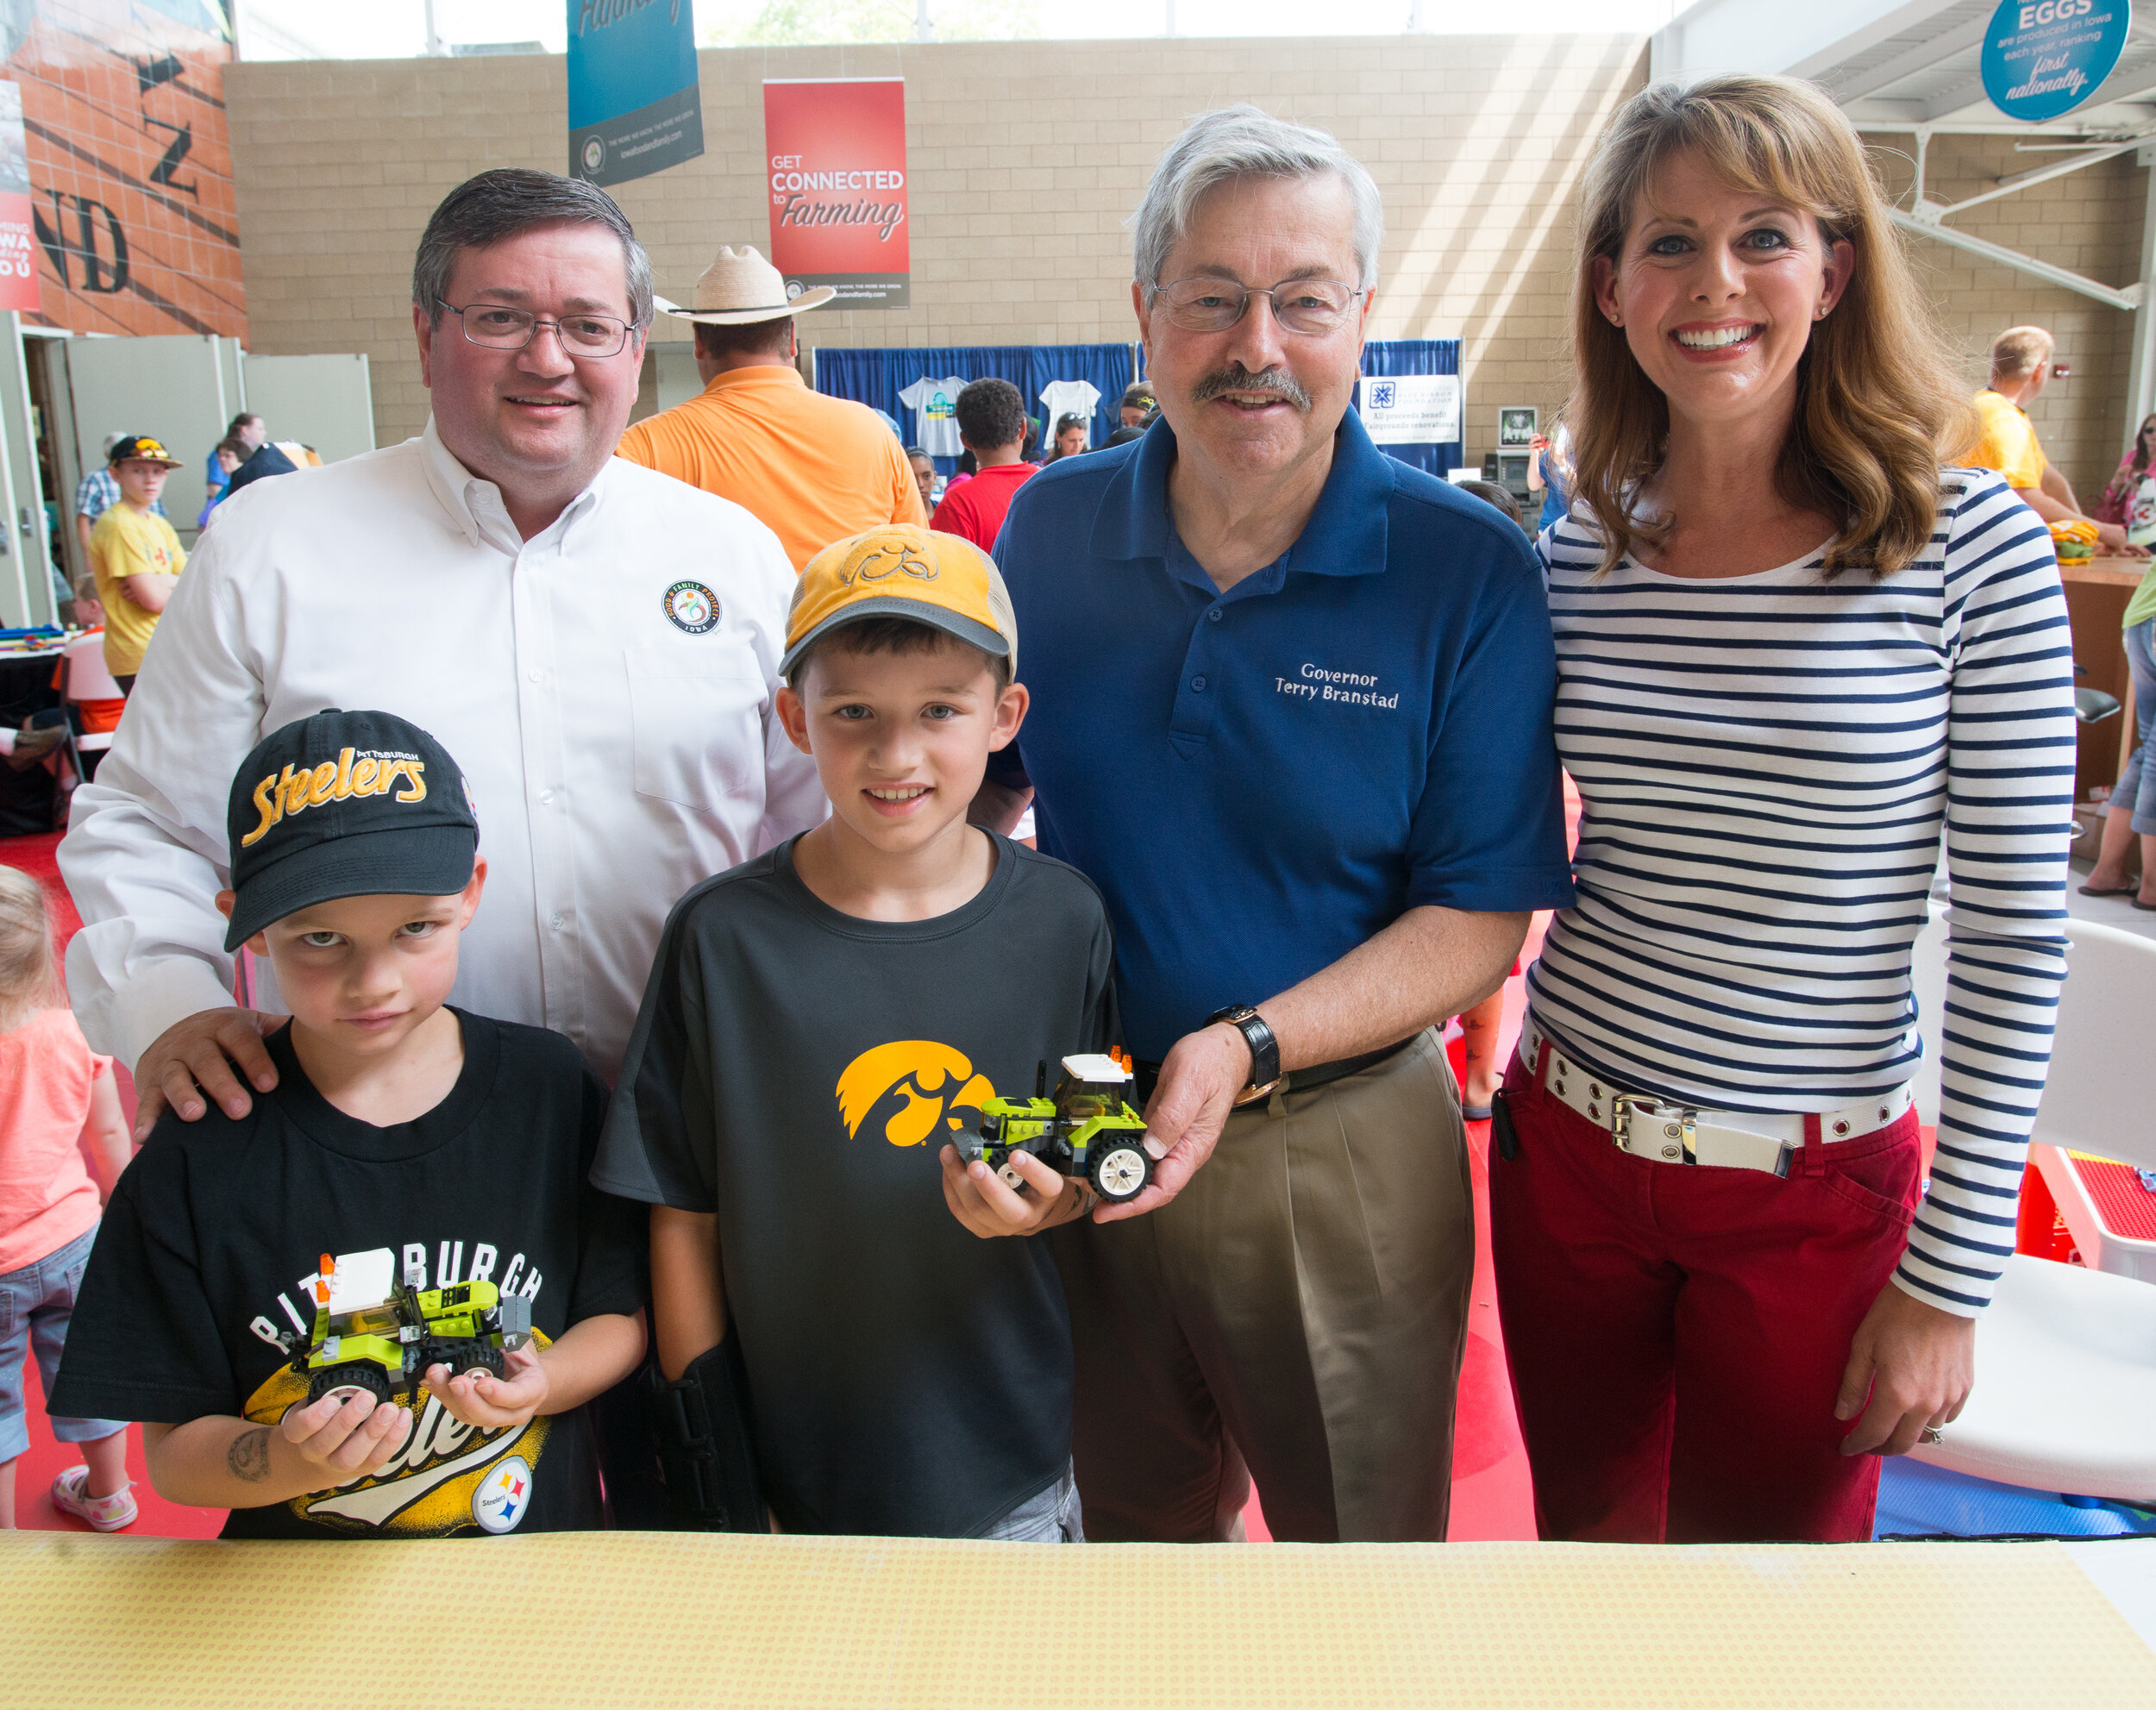 Local celebrities and fairgoers faced off in LEGO building challenges throughout the fair. Pictured is Iowa Soybean Association CEO Kirk Leeds, Ambassador Terry Branstad and Channel 13 News Anchor Erin Kiernan with Garrett and Grant Putze.